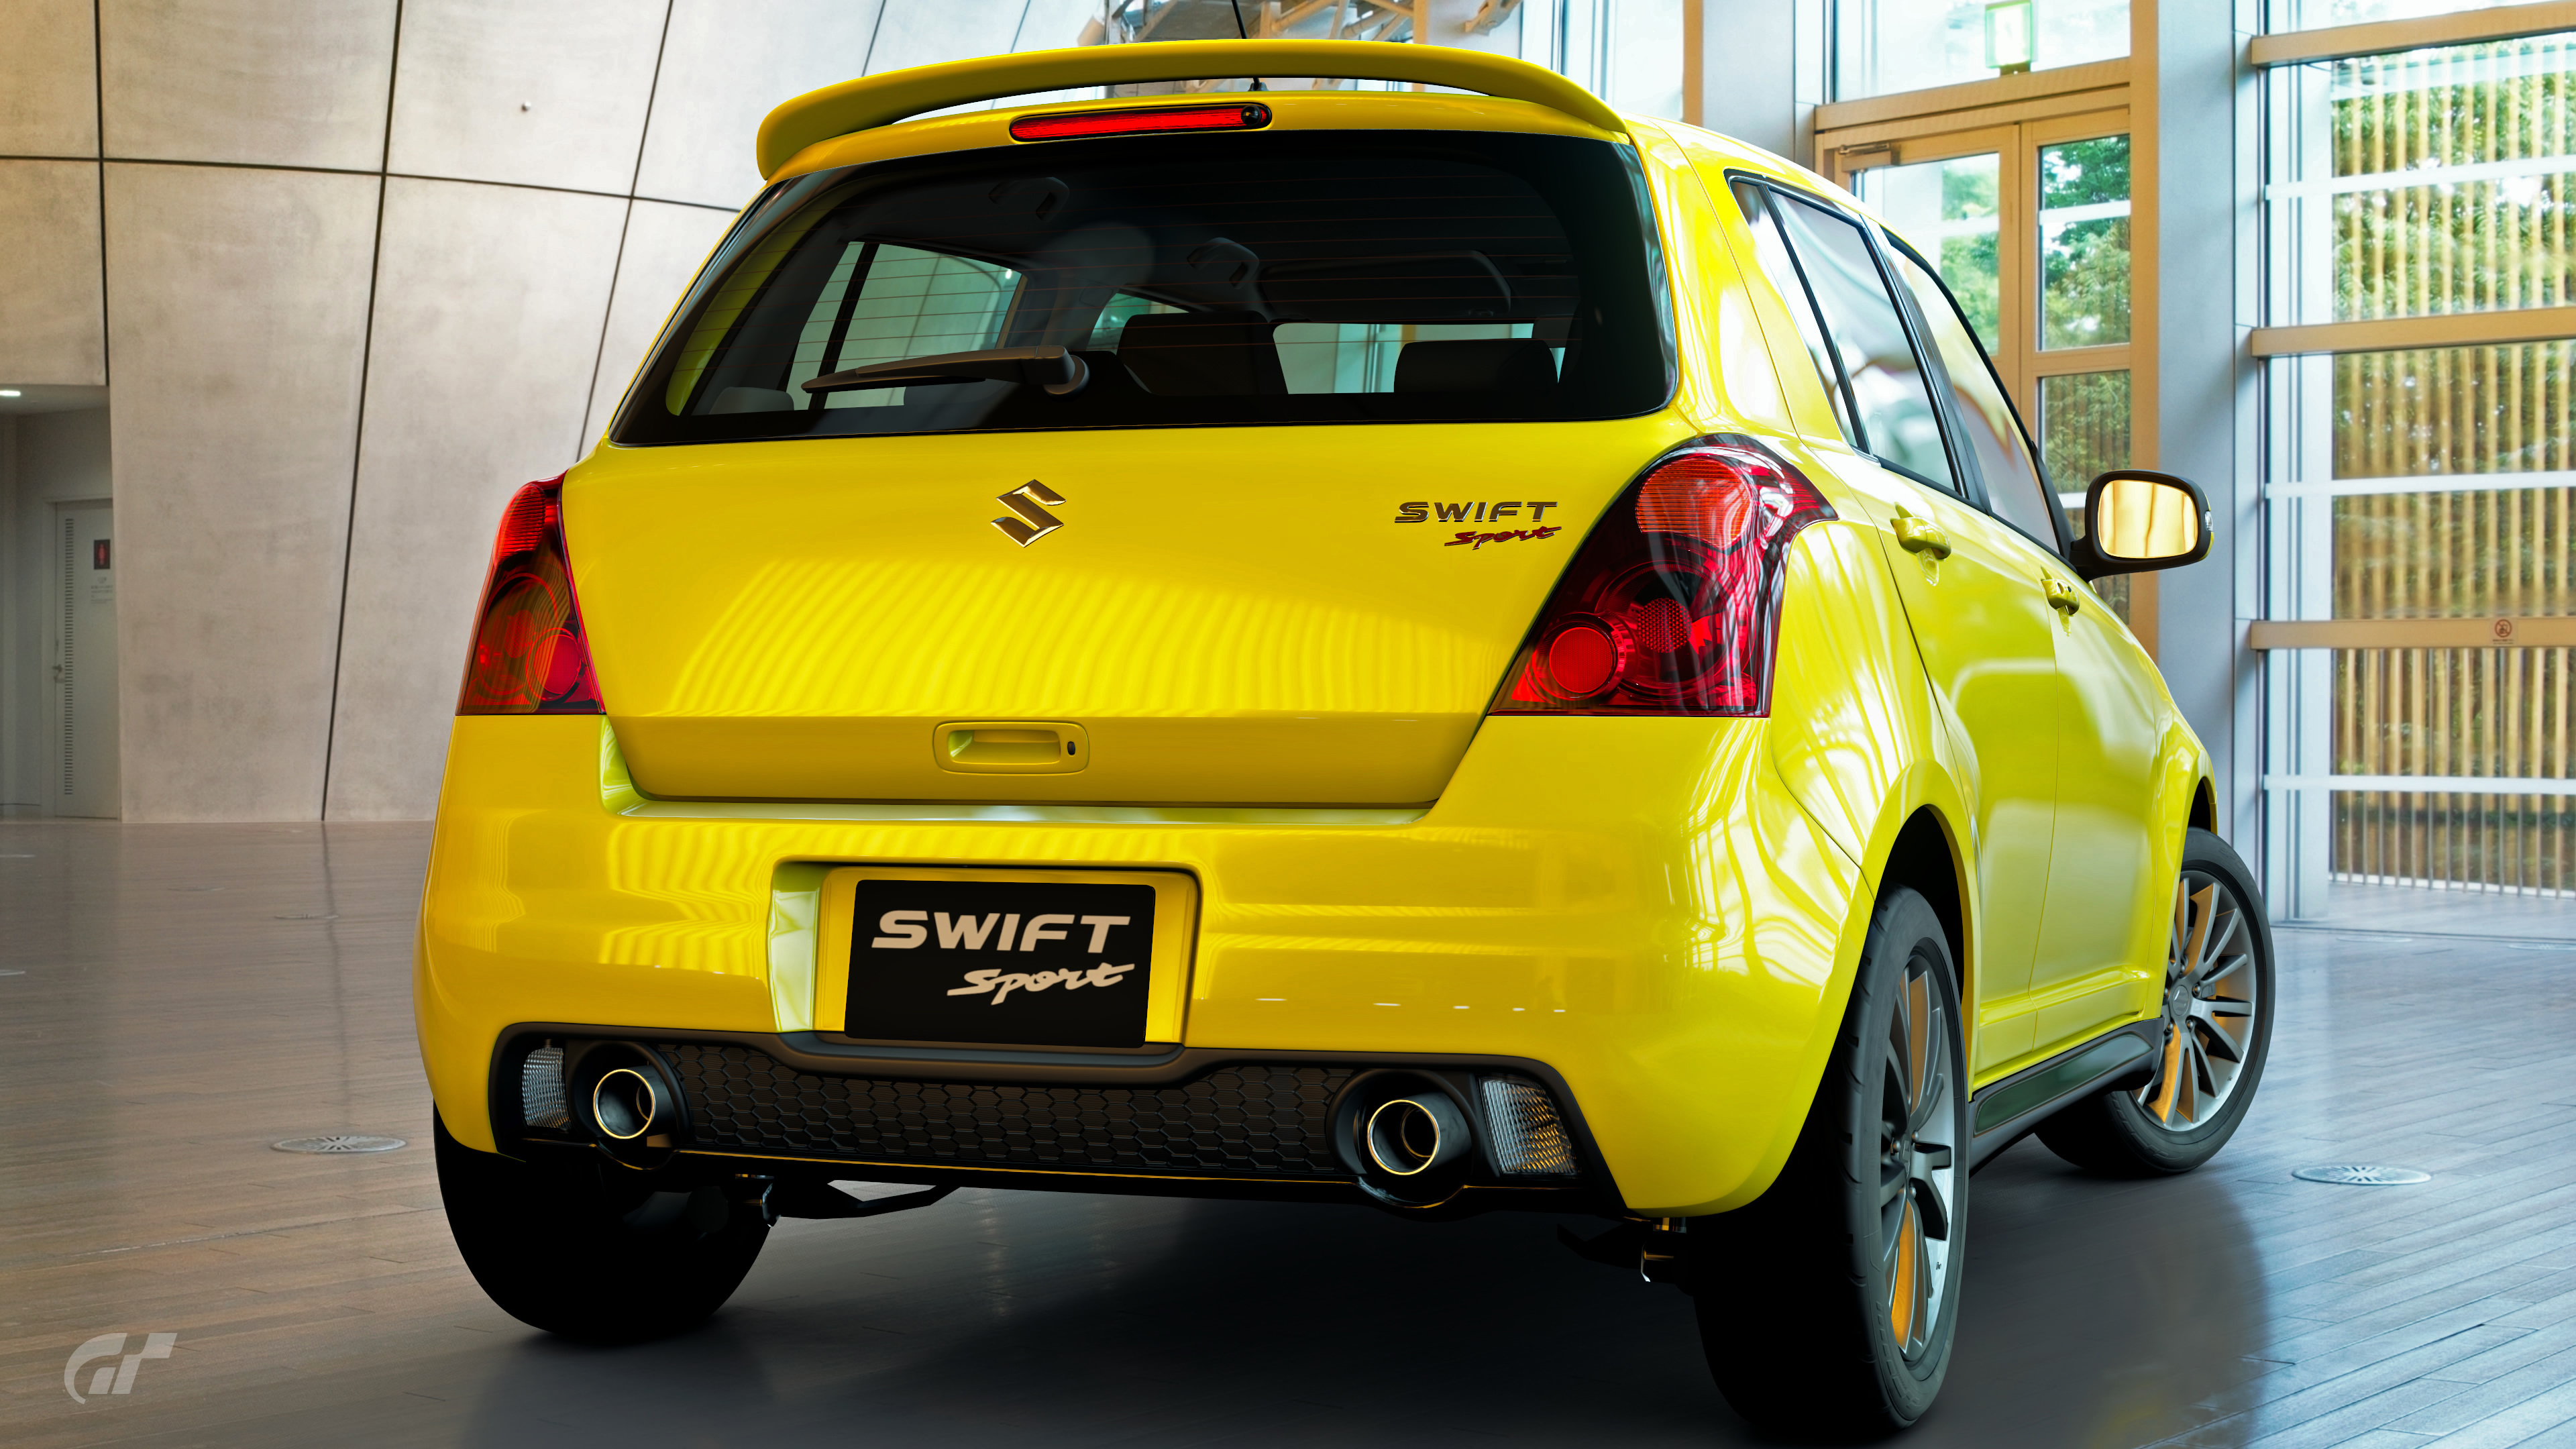 Suzuki Swift, Sporty and compact, Reliable performance, Stylish appearance, 3840x2160 4K Desktop